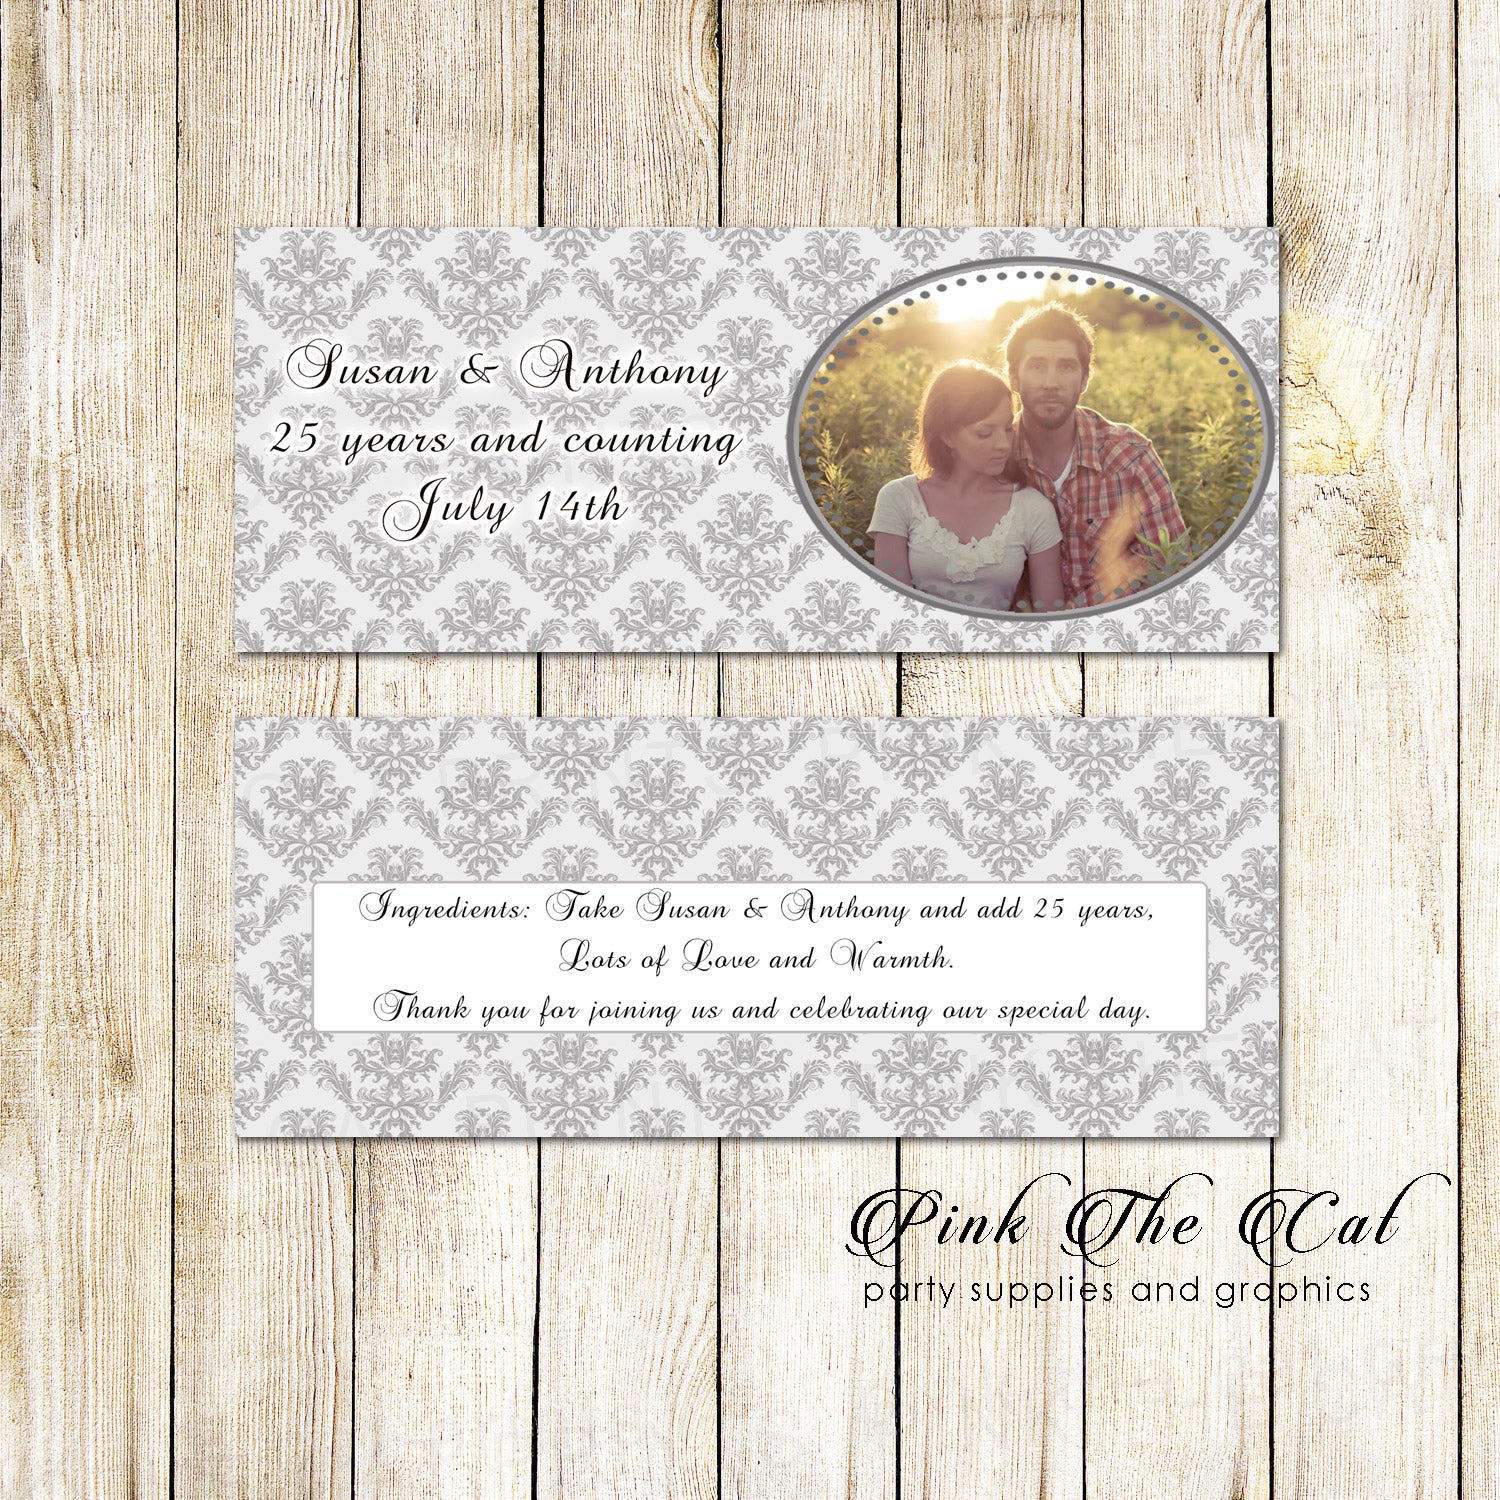 30 Candy Bar Wrappers Silver Wedding Anniversary Photo Labels